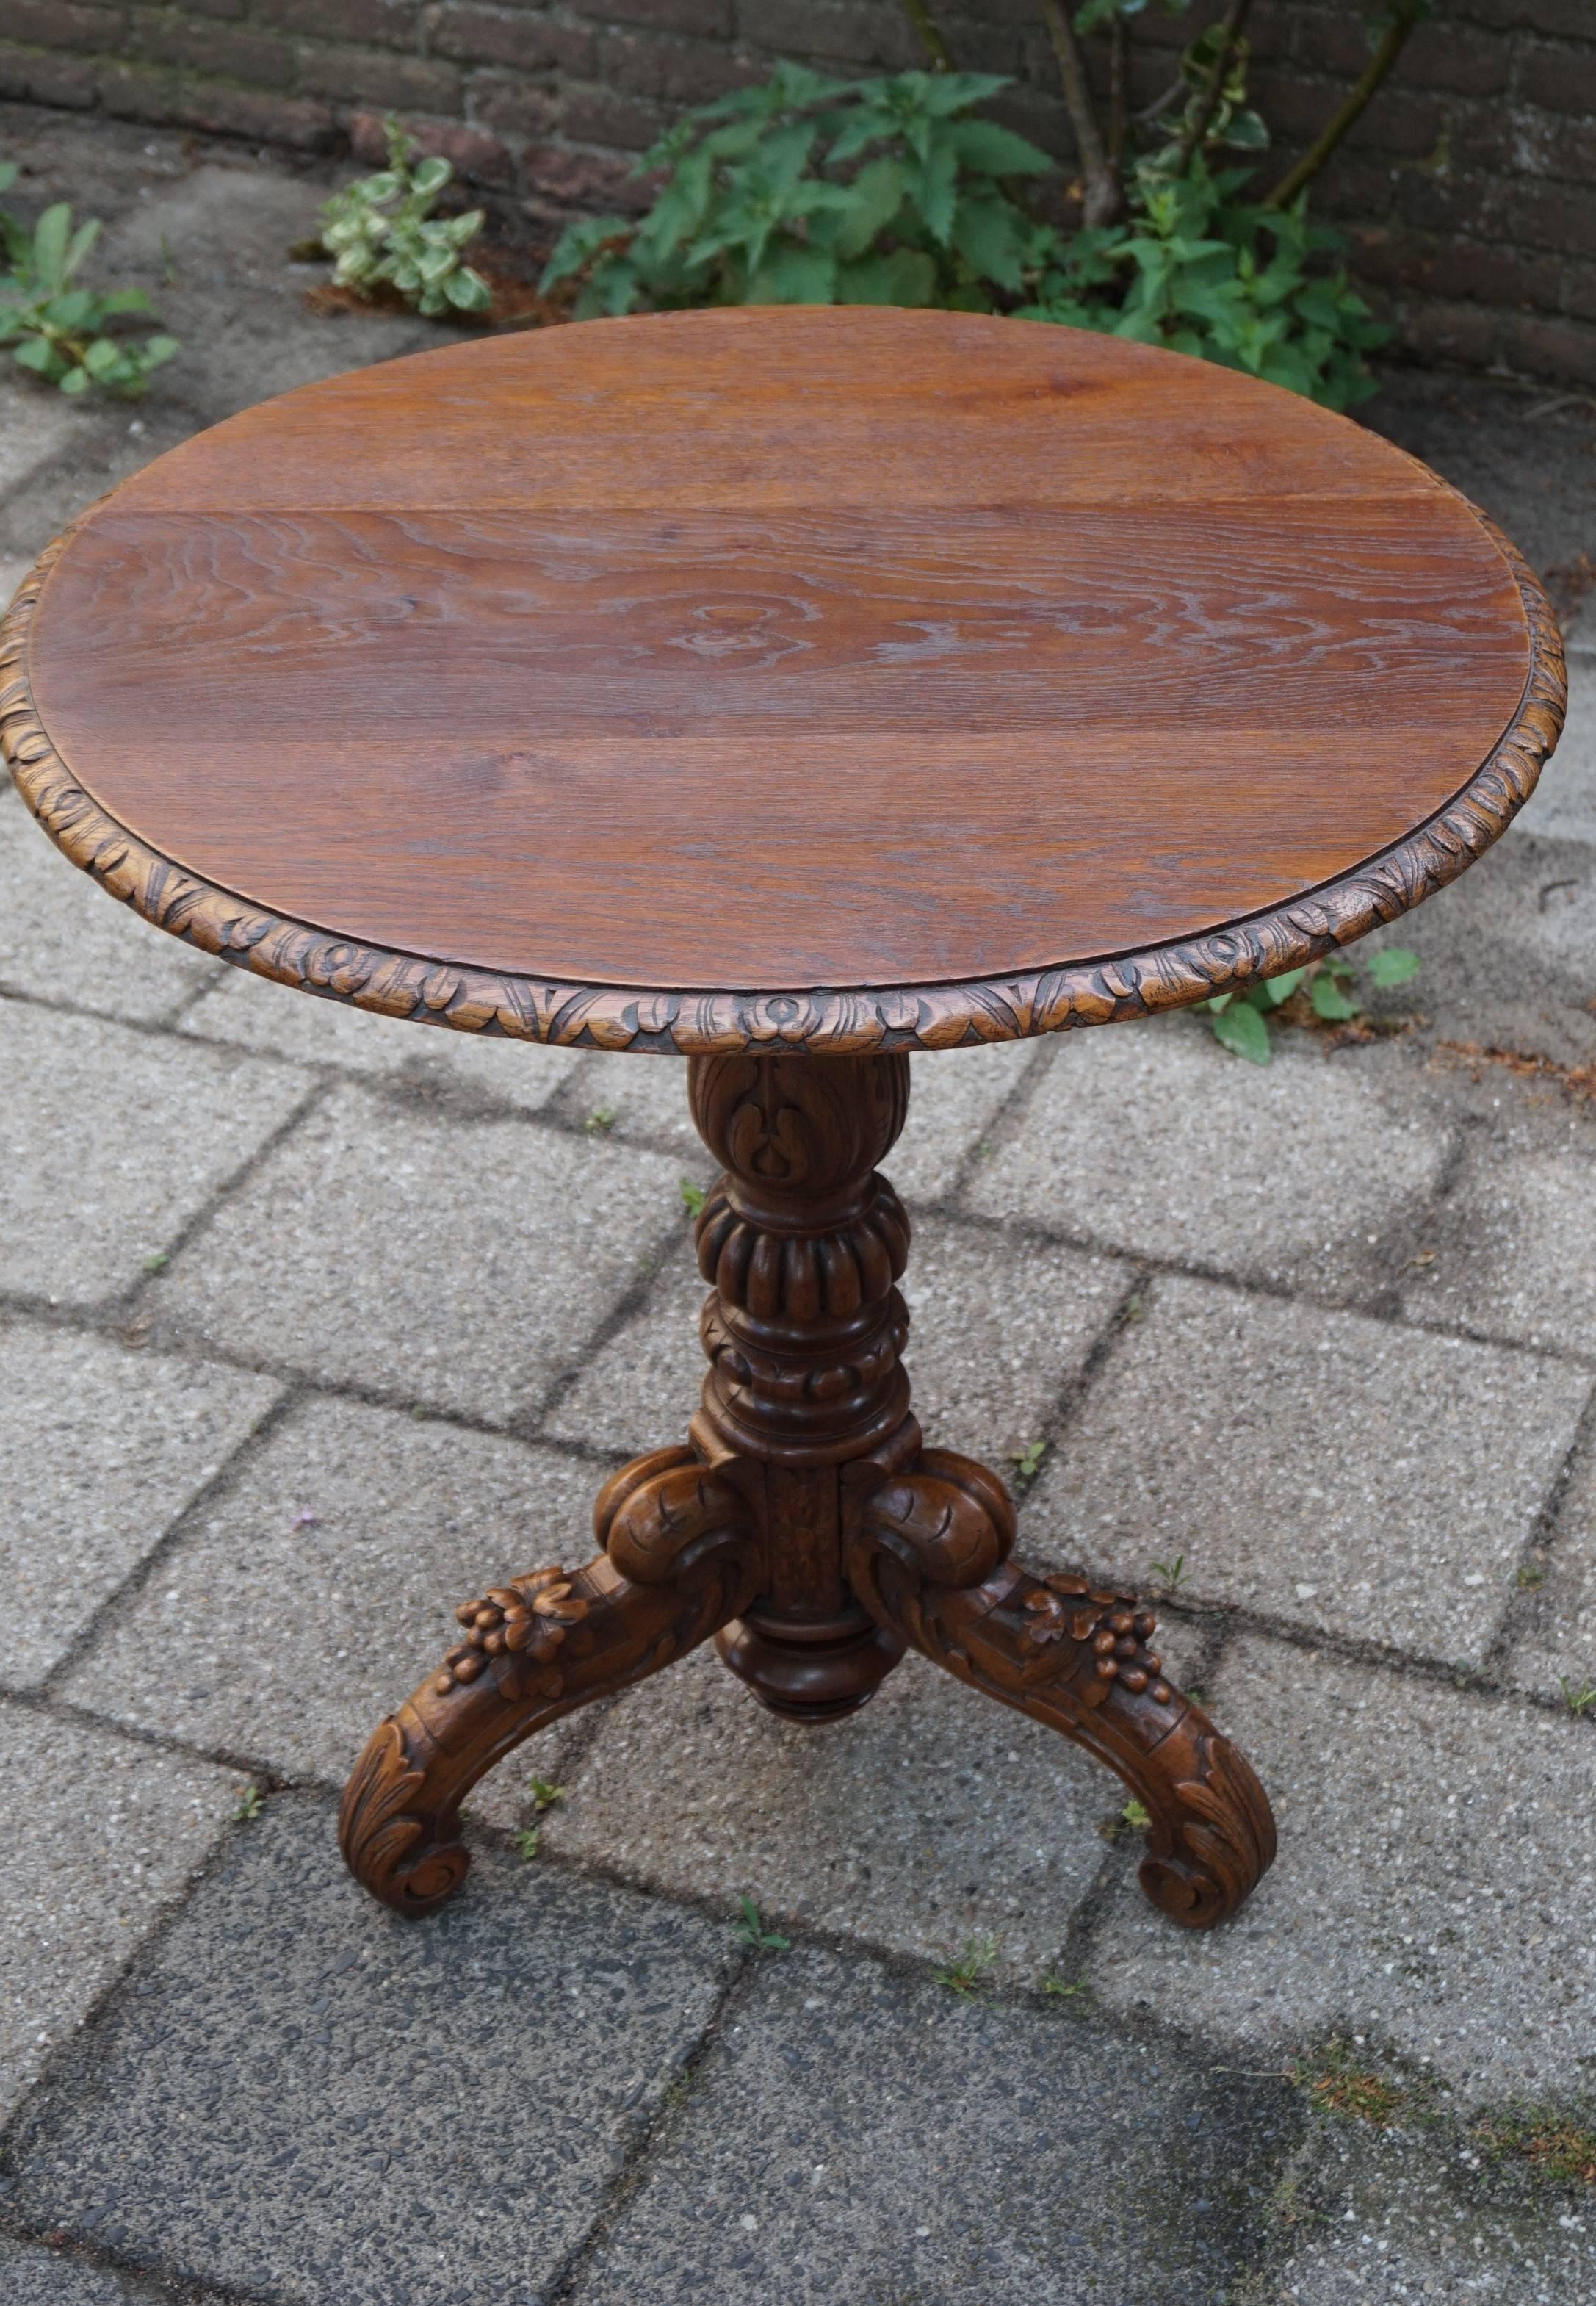 Highly stylish and beautifully decorative antique table.

Antique tilt top tables are almost always beautiful, practical and very well made. However, if you are looking for one, then they are almost always very similar and there are not many designs